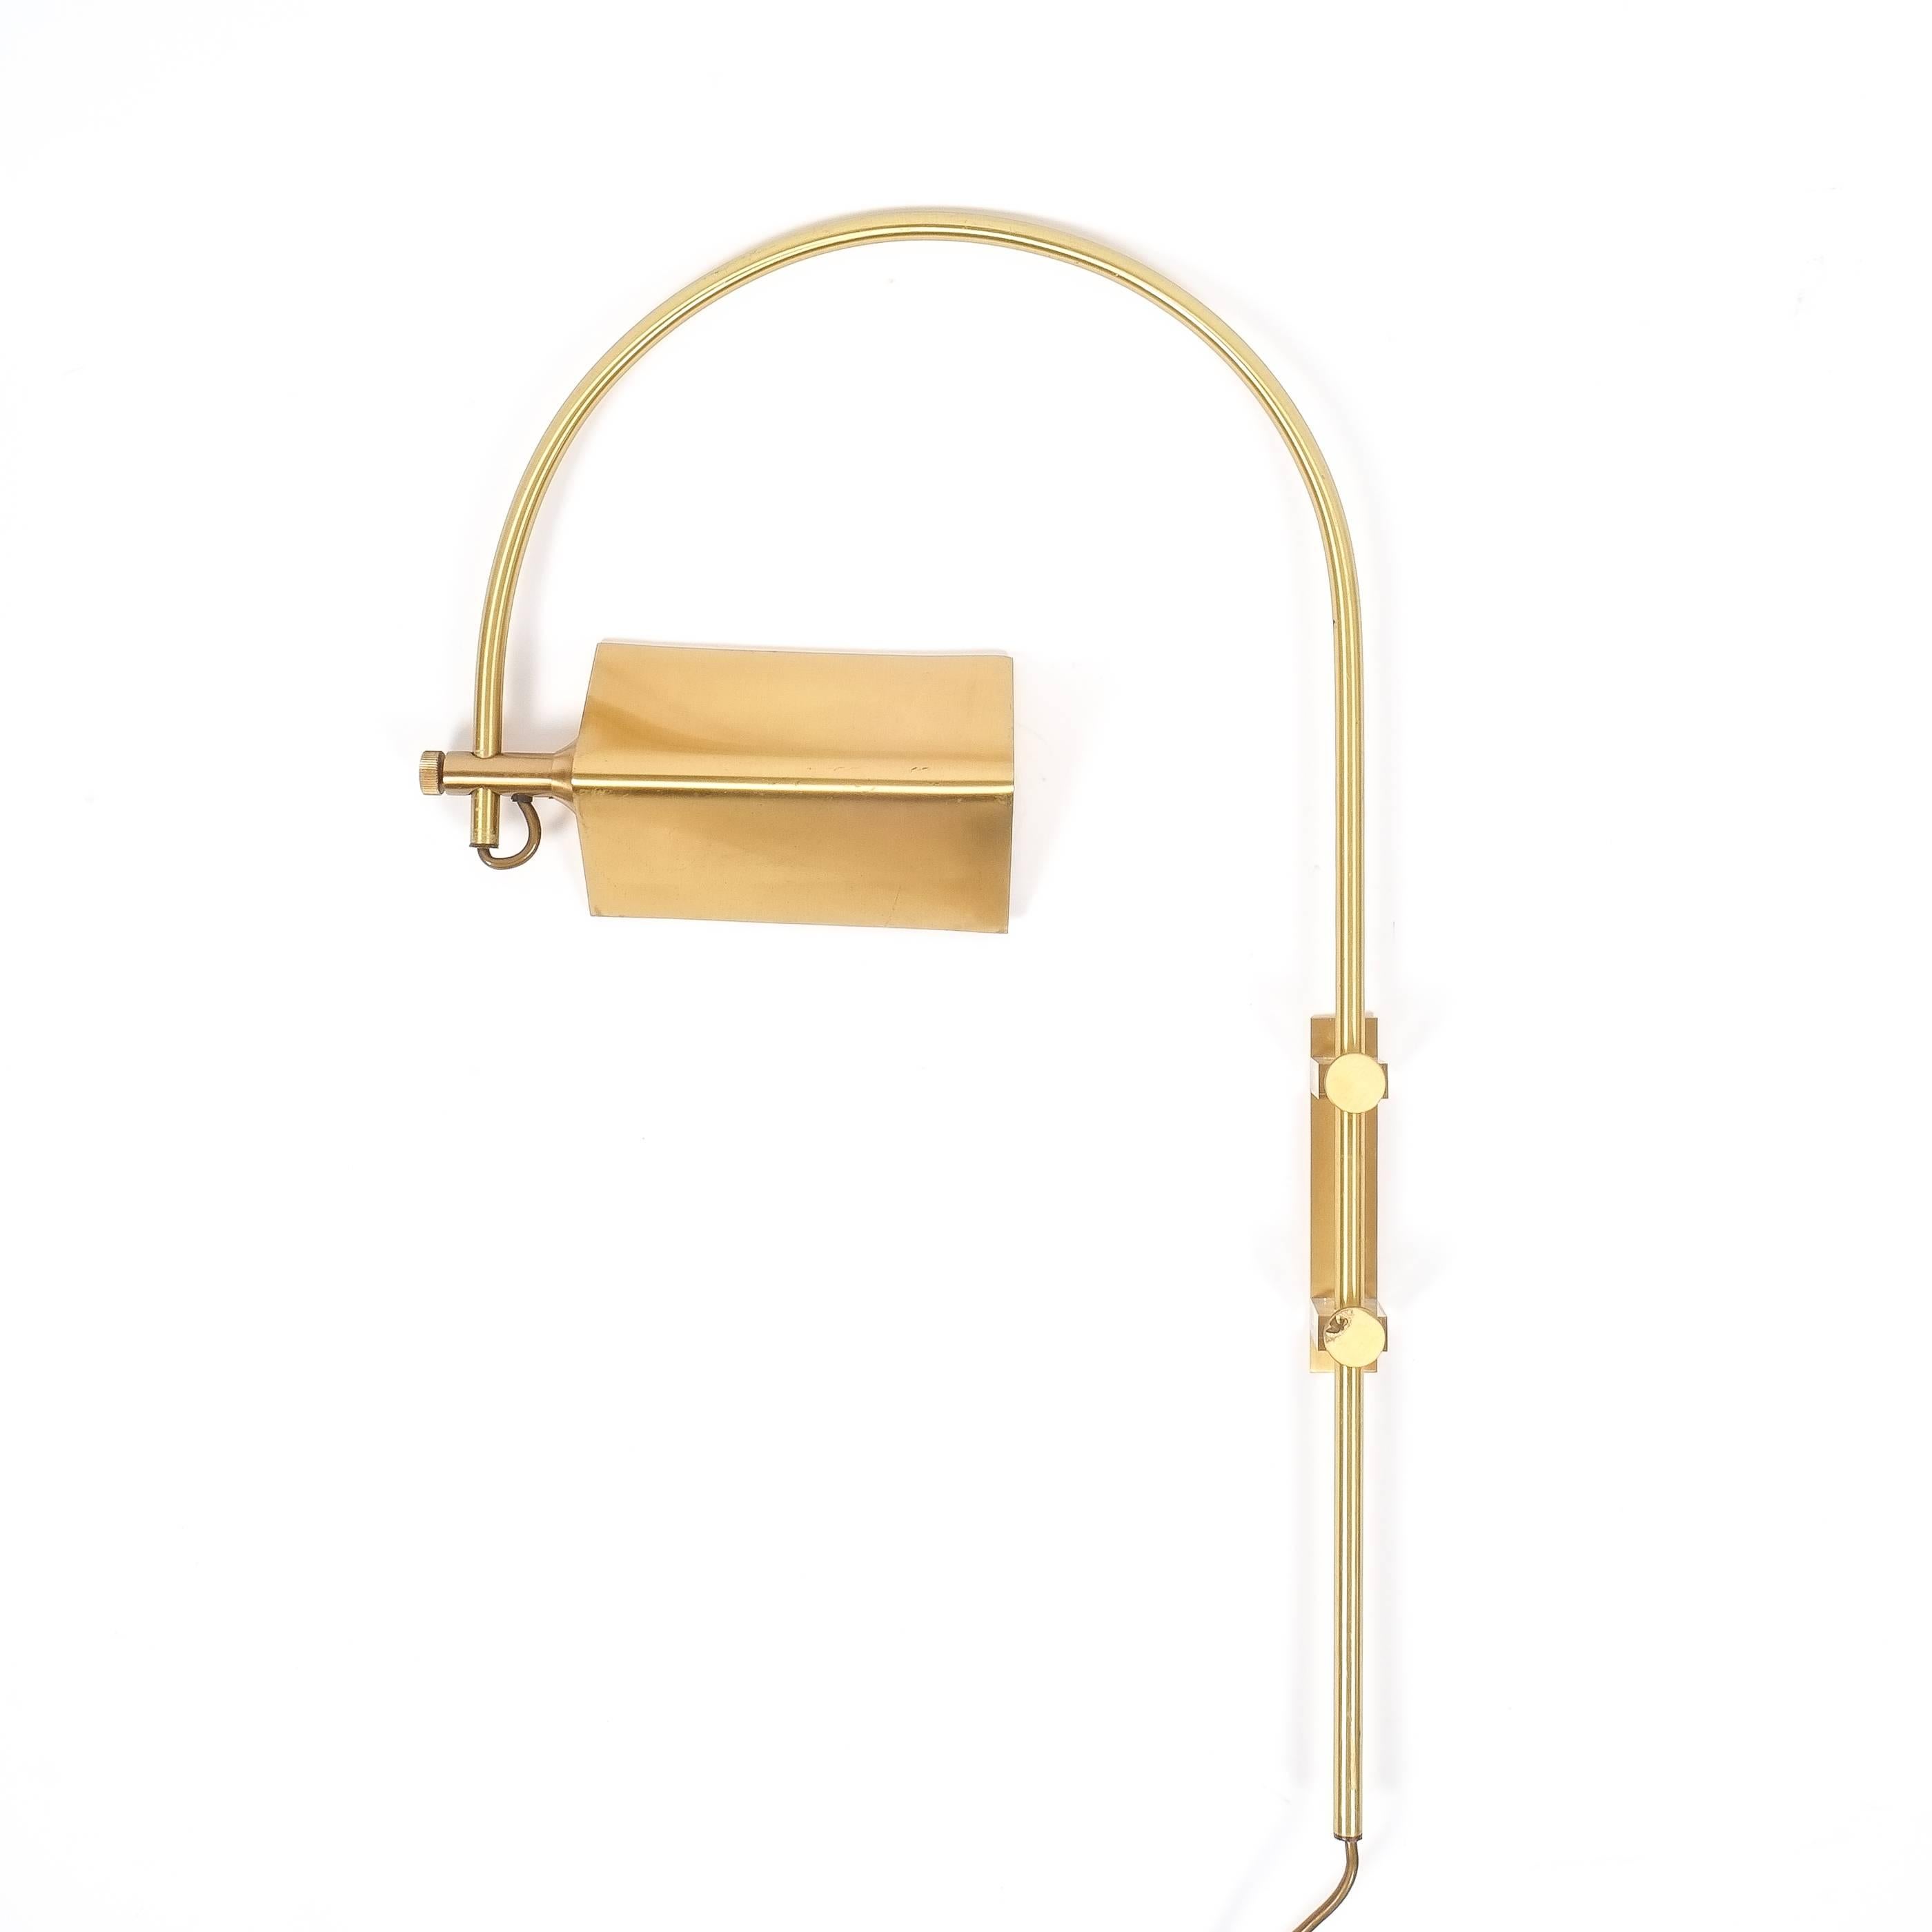 Nice articulate wall light made from brass and Lucite attributed Koch & Lowy, 1960. It can pivot around the Lucite joints and easily adjustable in height. Very good original condition.